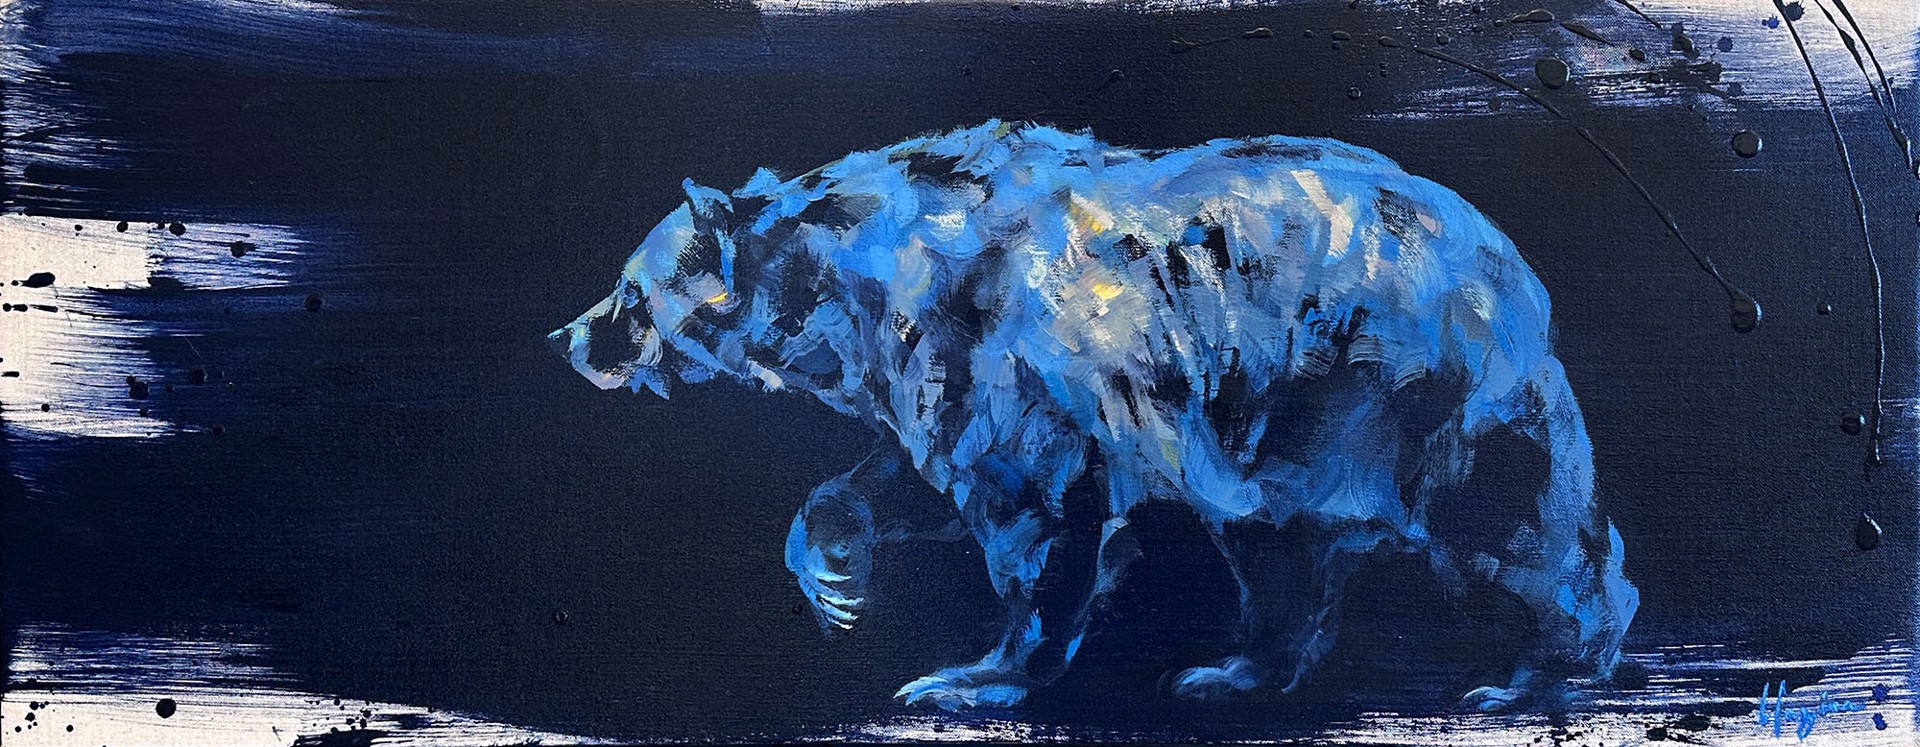 Original Oil Painting By Amber Blazina Featuring A Walking Grizzly Bear Loosely Painted Over Abstract Black Brushstrokes On Exposed Linen